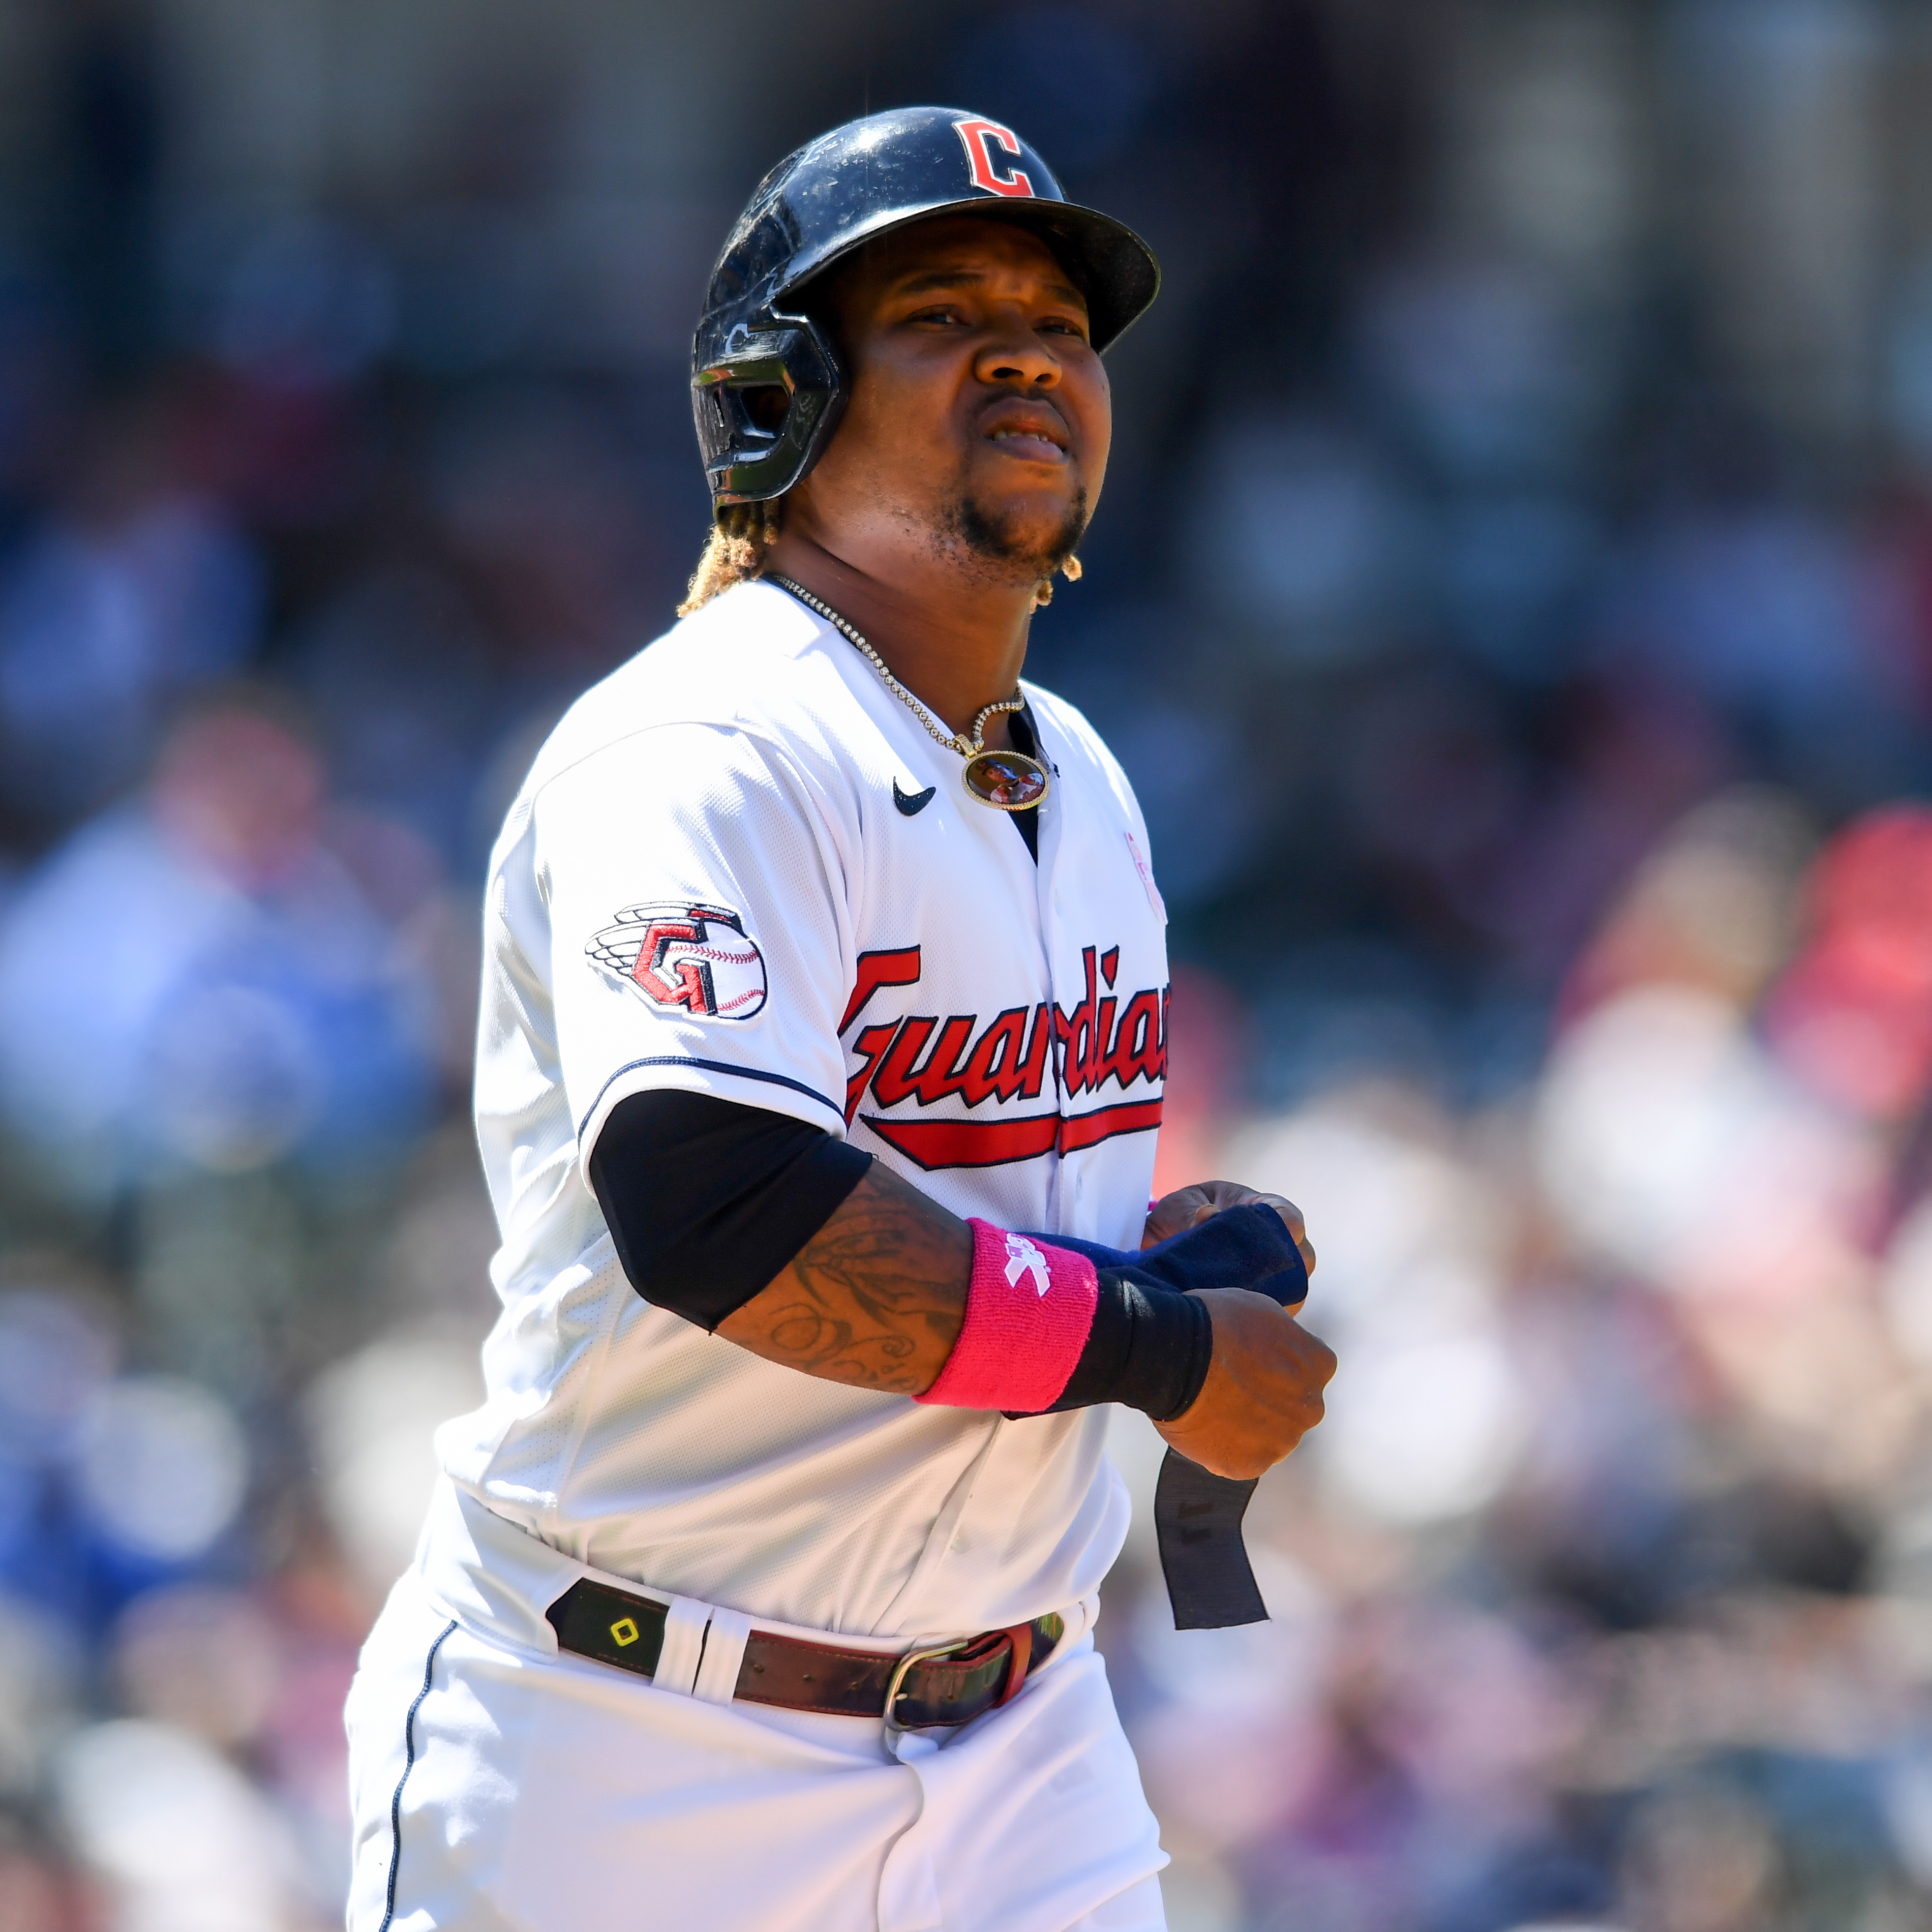 Jose Ramirez to Undergo X-Rays on Leg Injury Suffered in Guardians' Loss to Reds